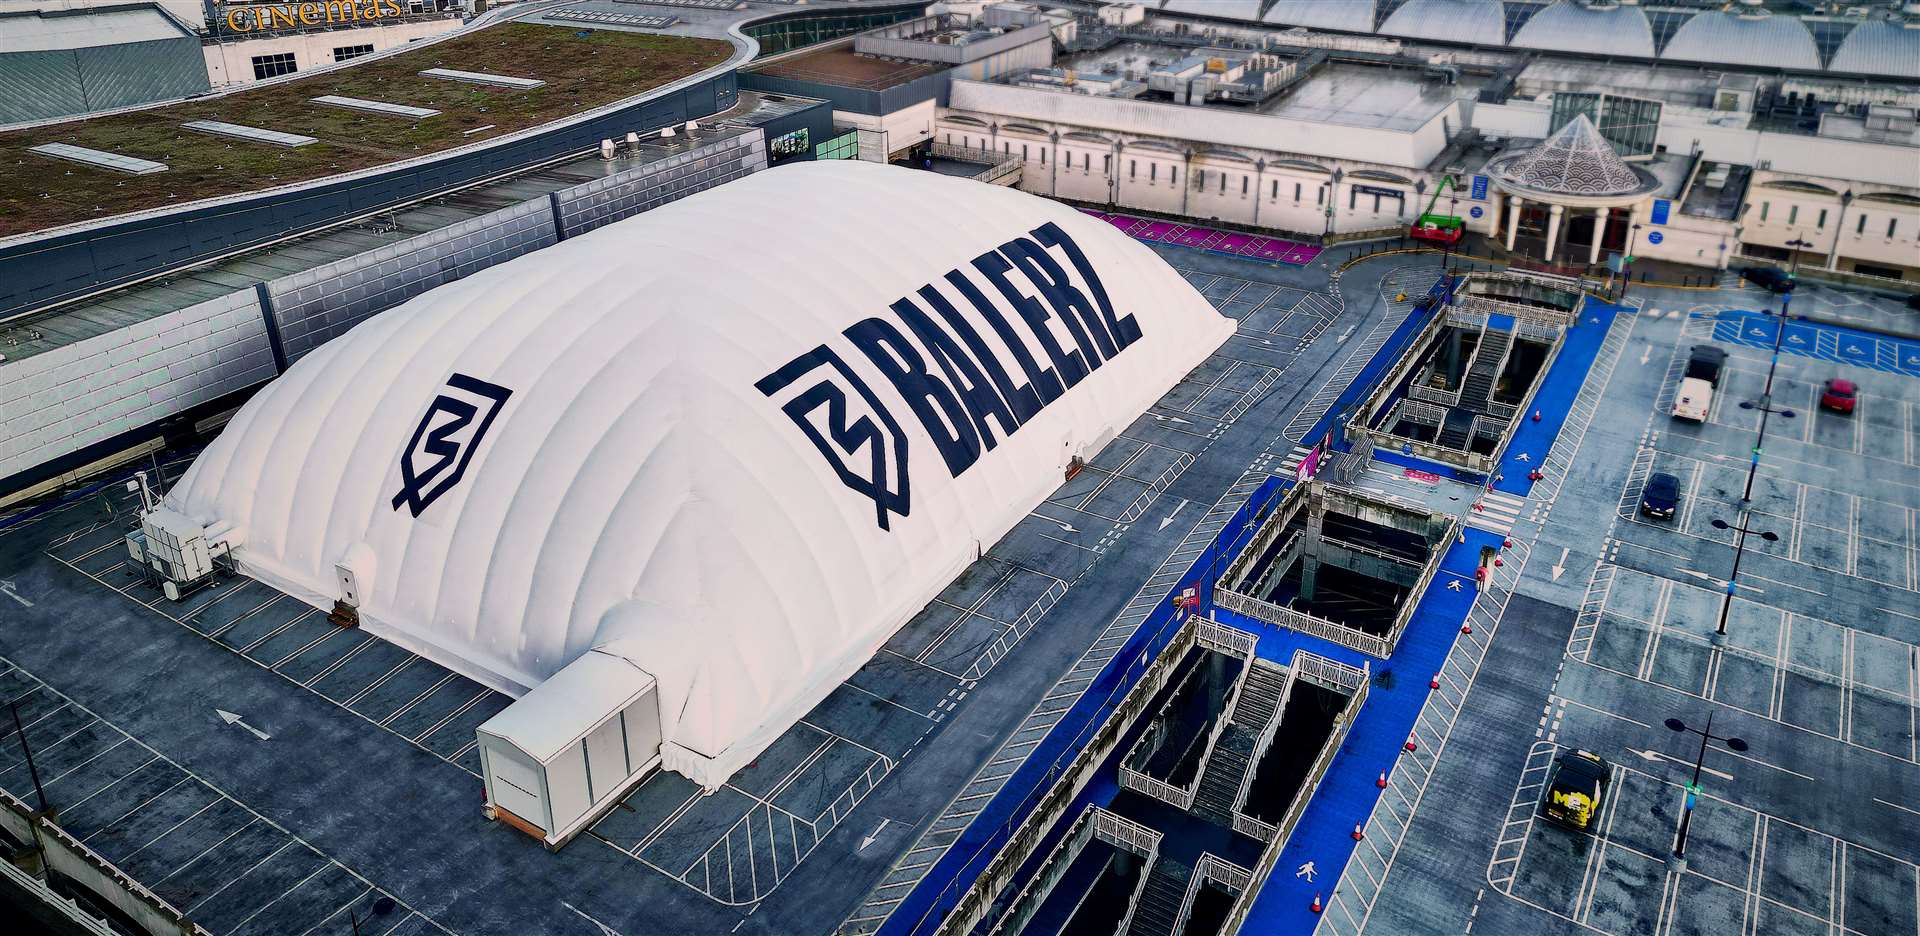 Win a football coaching session with England star Rio Ferdinand at the new Ballerz dome at Bluewater. Picture: Ballerz